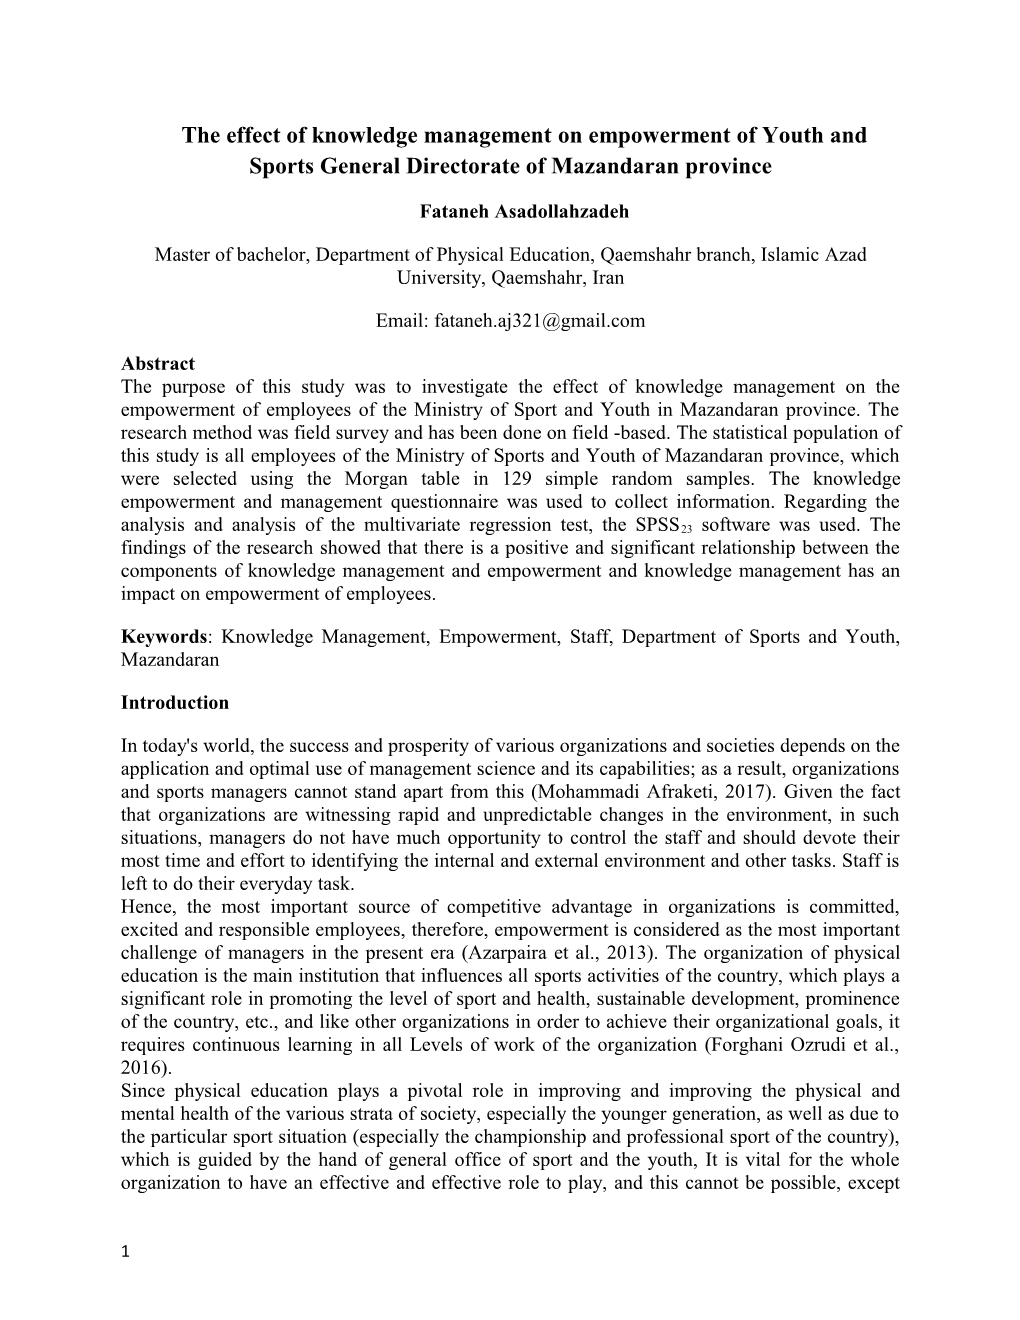 The Effect of Knowledge Management on Empowerment of Youth and Sports General Directorate